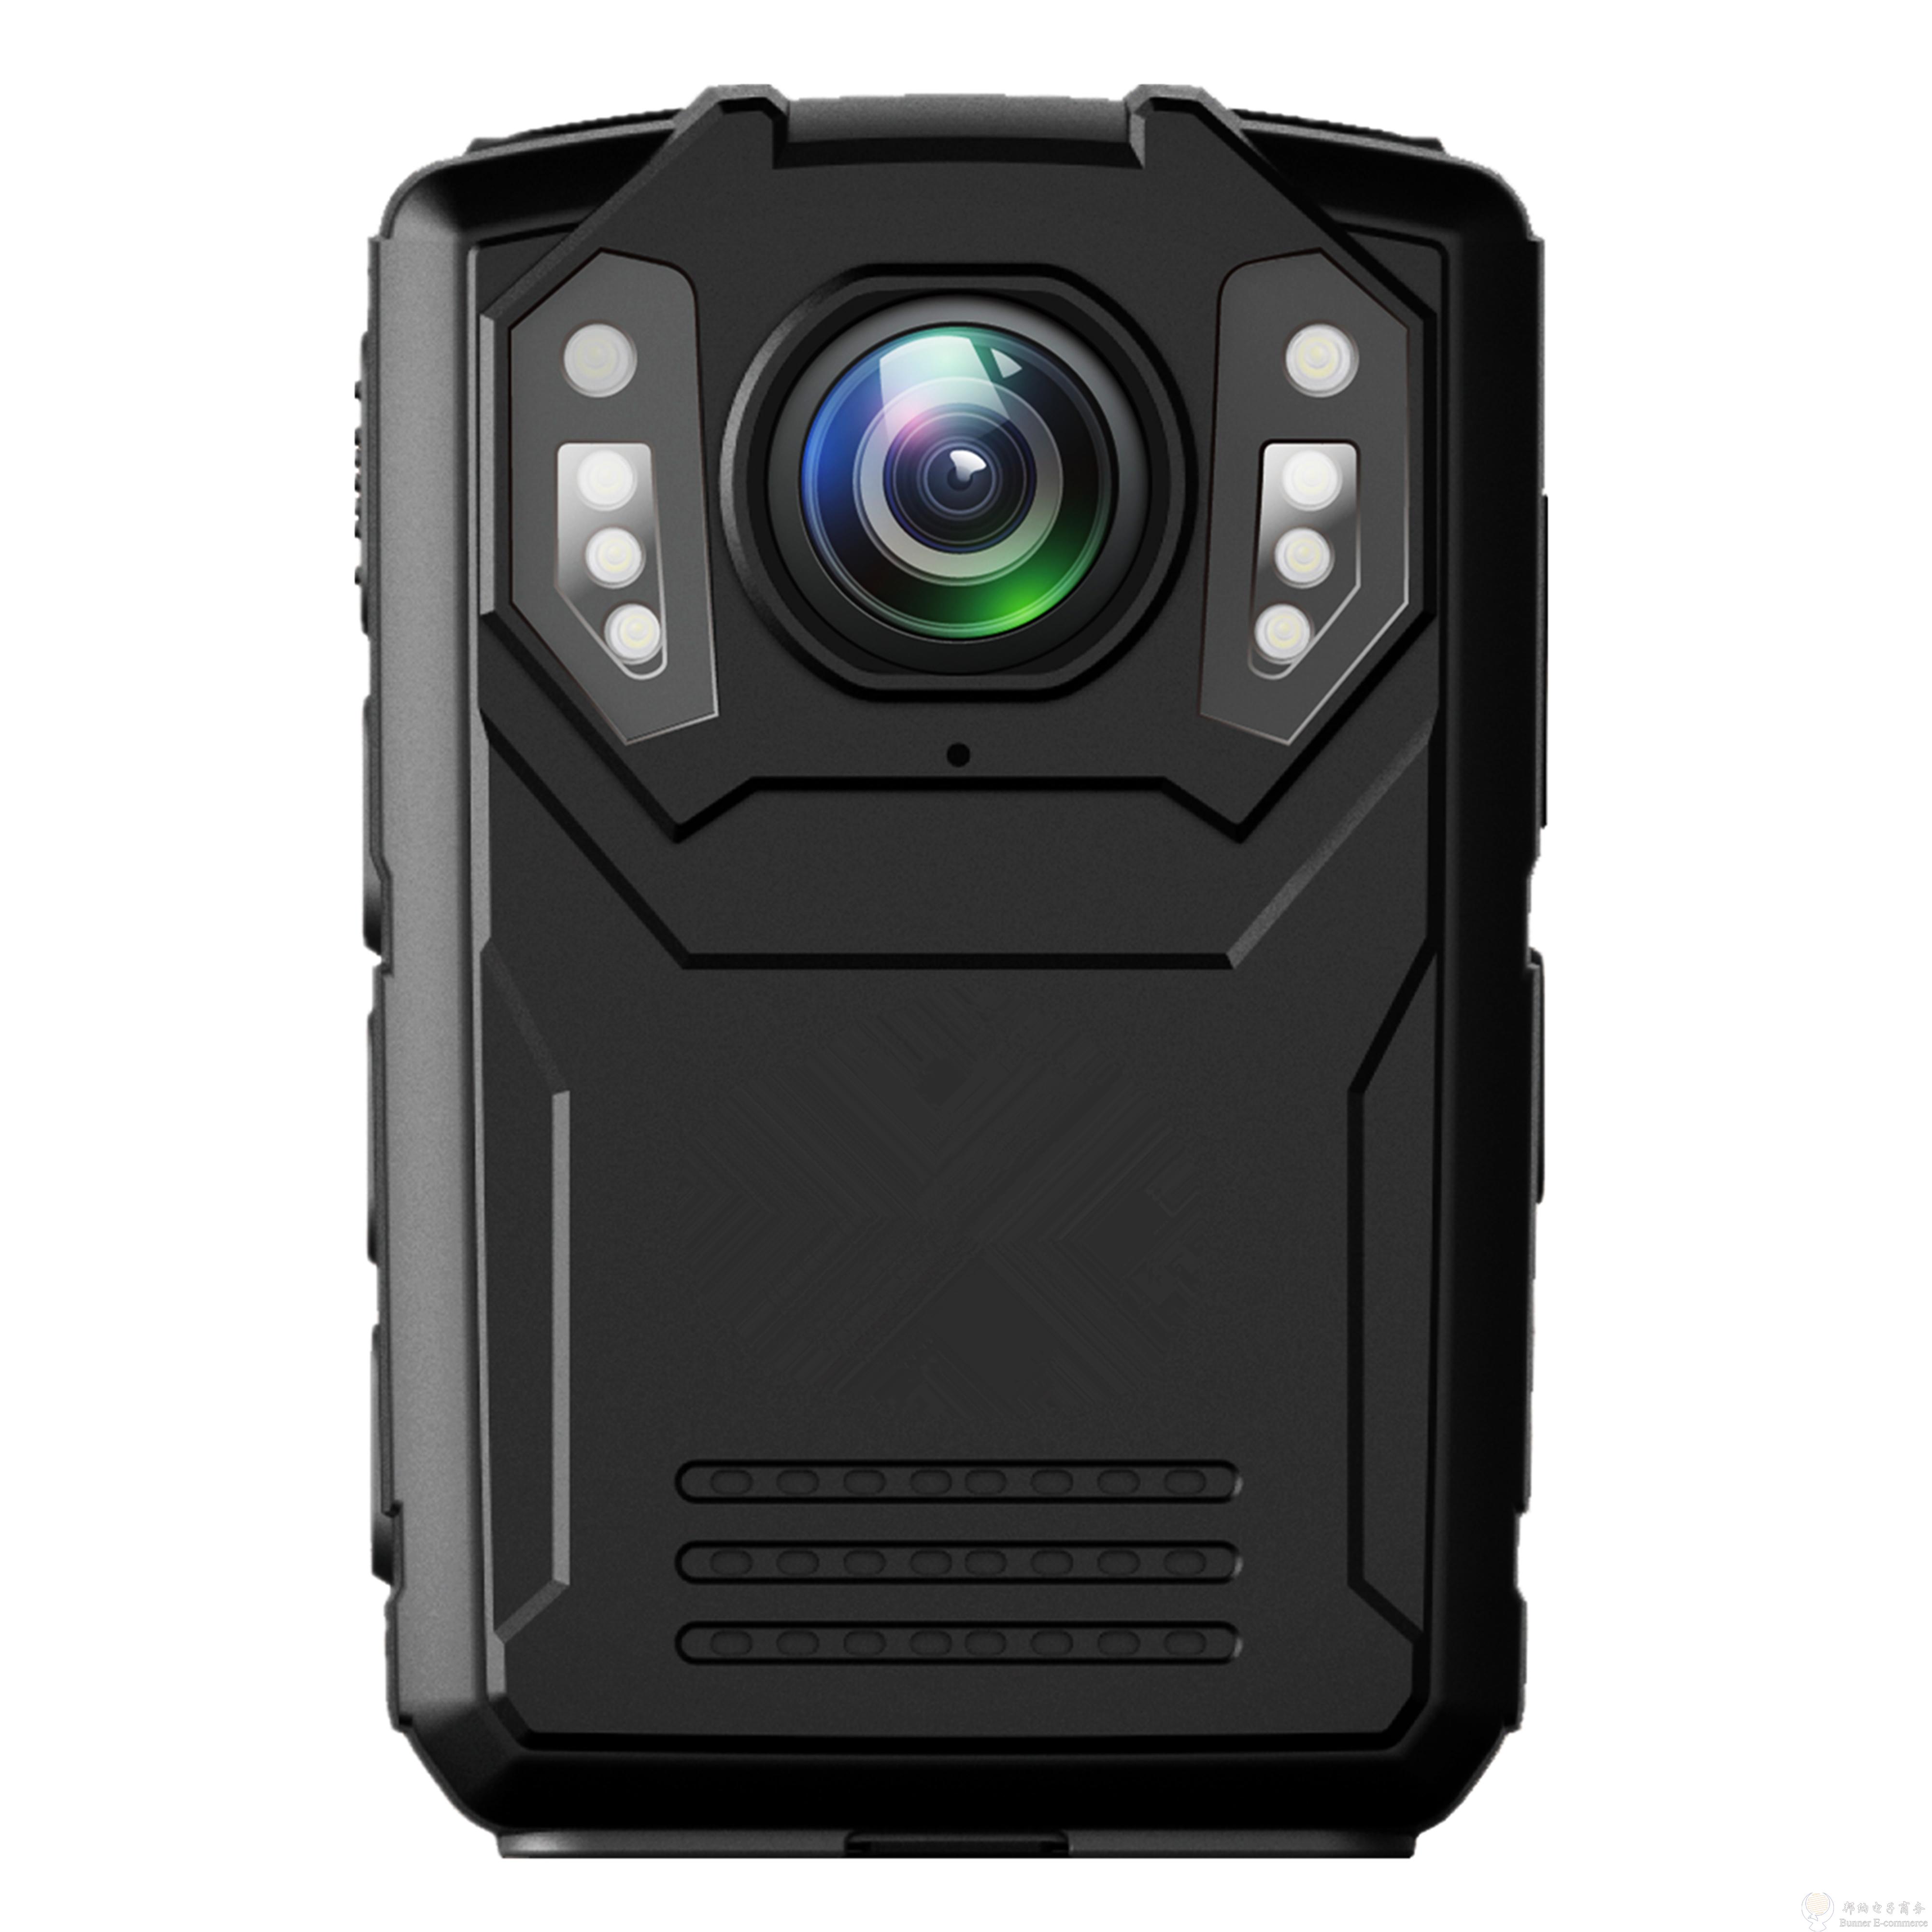 Bodycam 1080P 128GB 4G WIFI and GPS version SOS and Push-to-talk c/w 2 ...